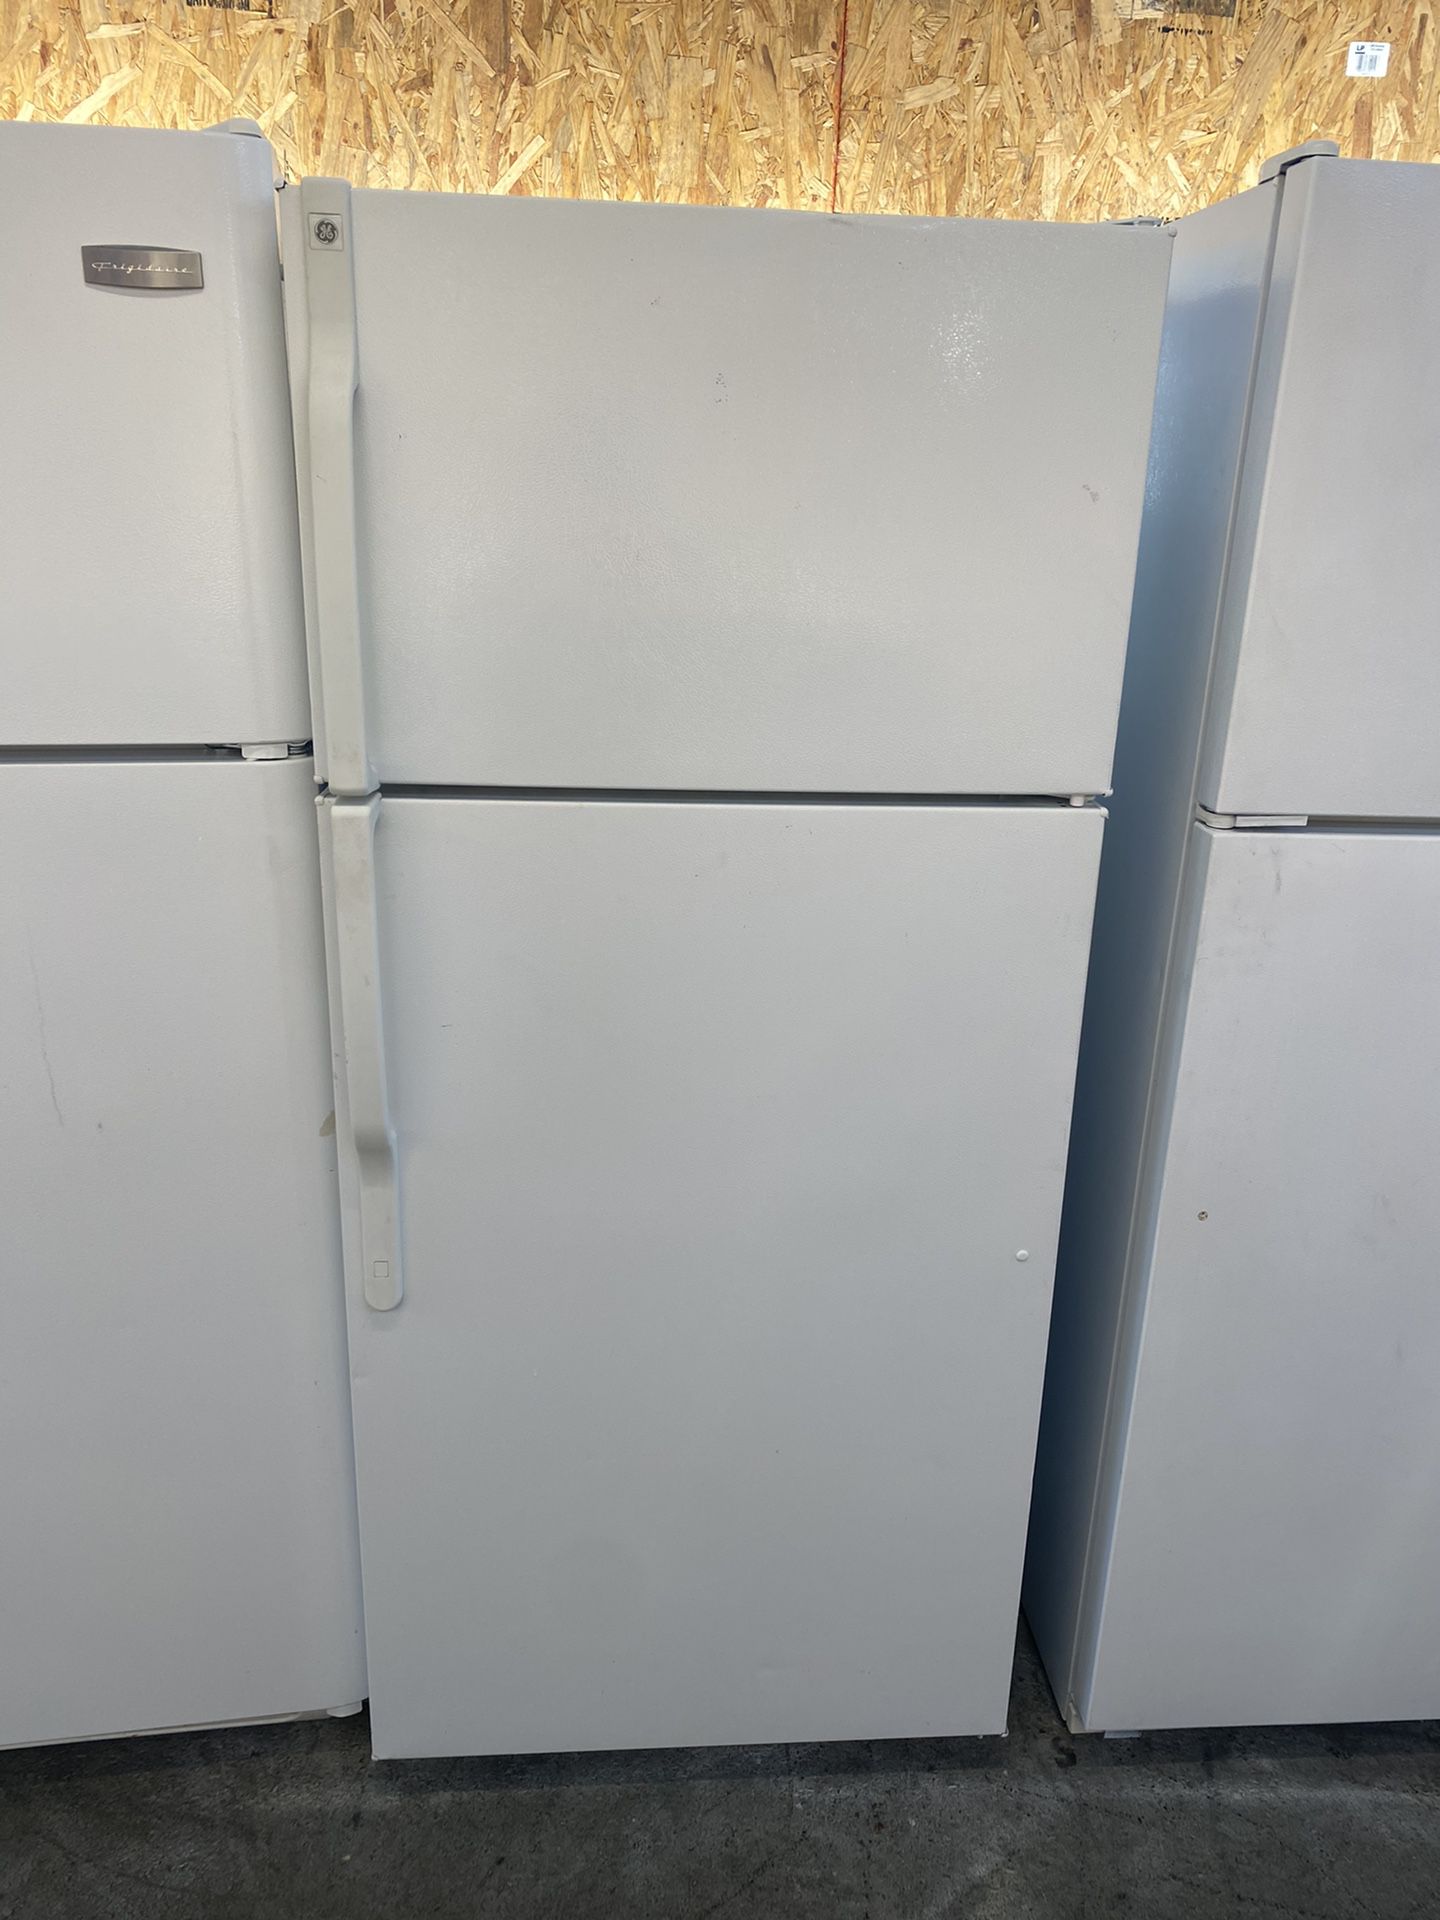 $239 GE white 17 cubic refrigerator with delivery in the San Fernando Valley